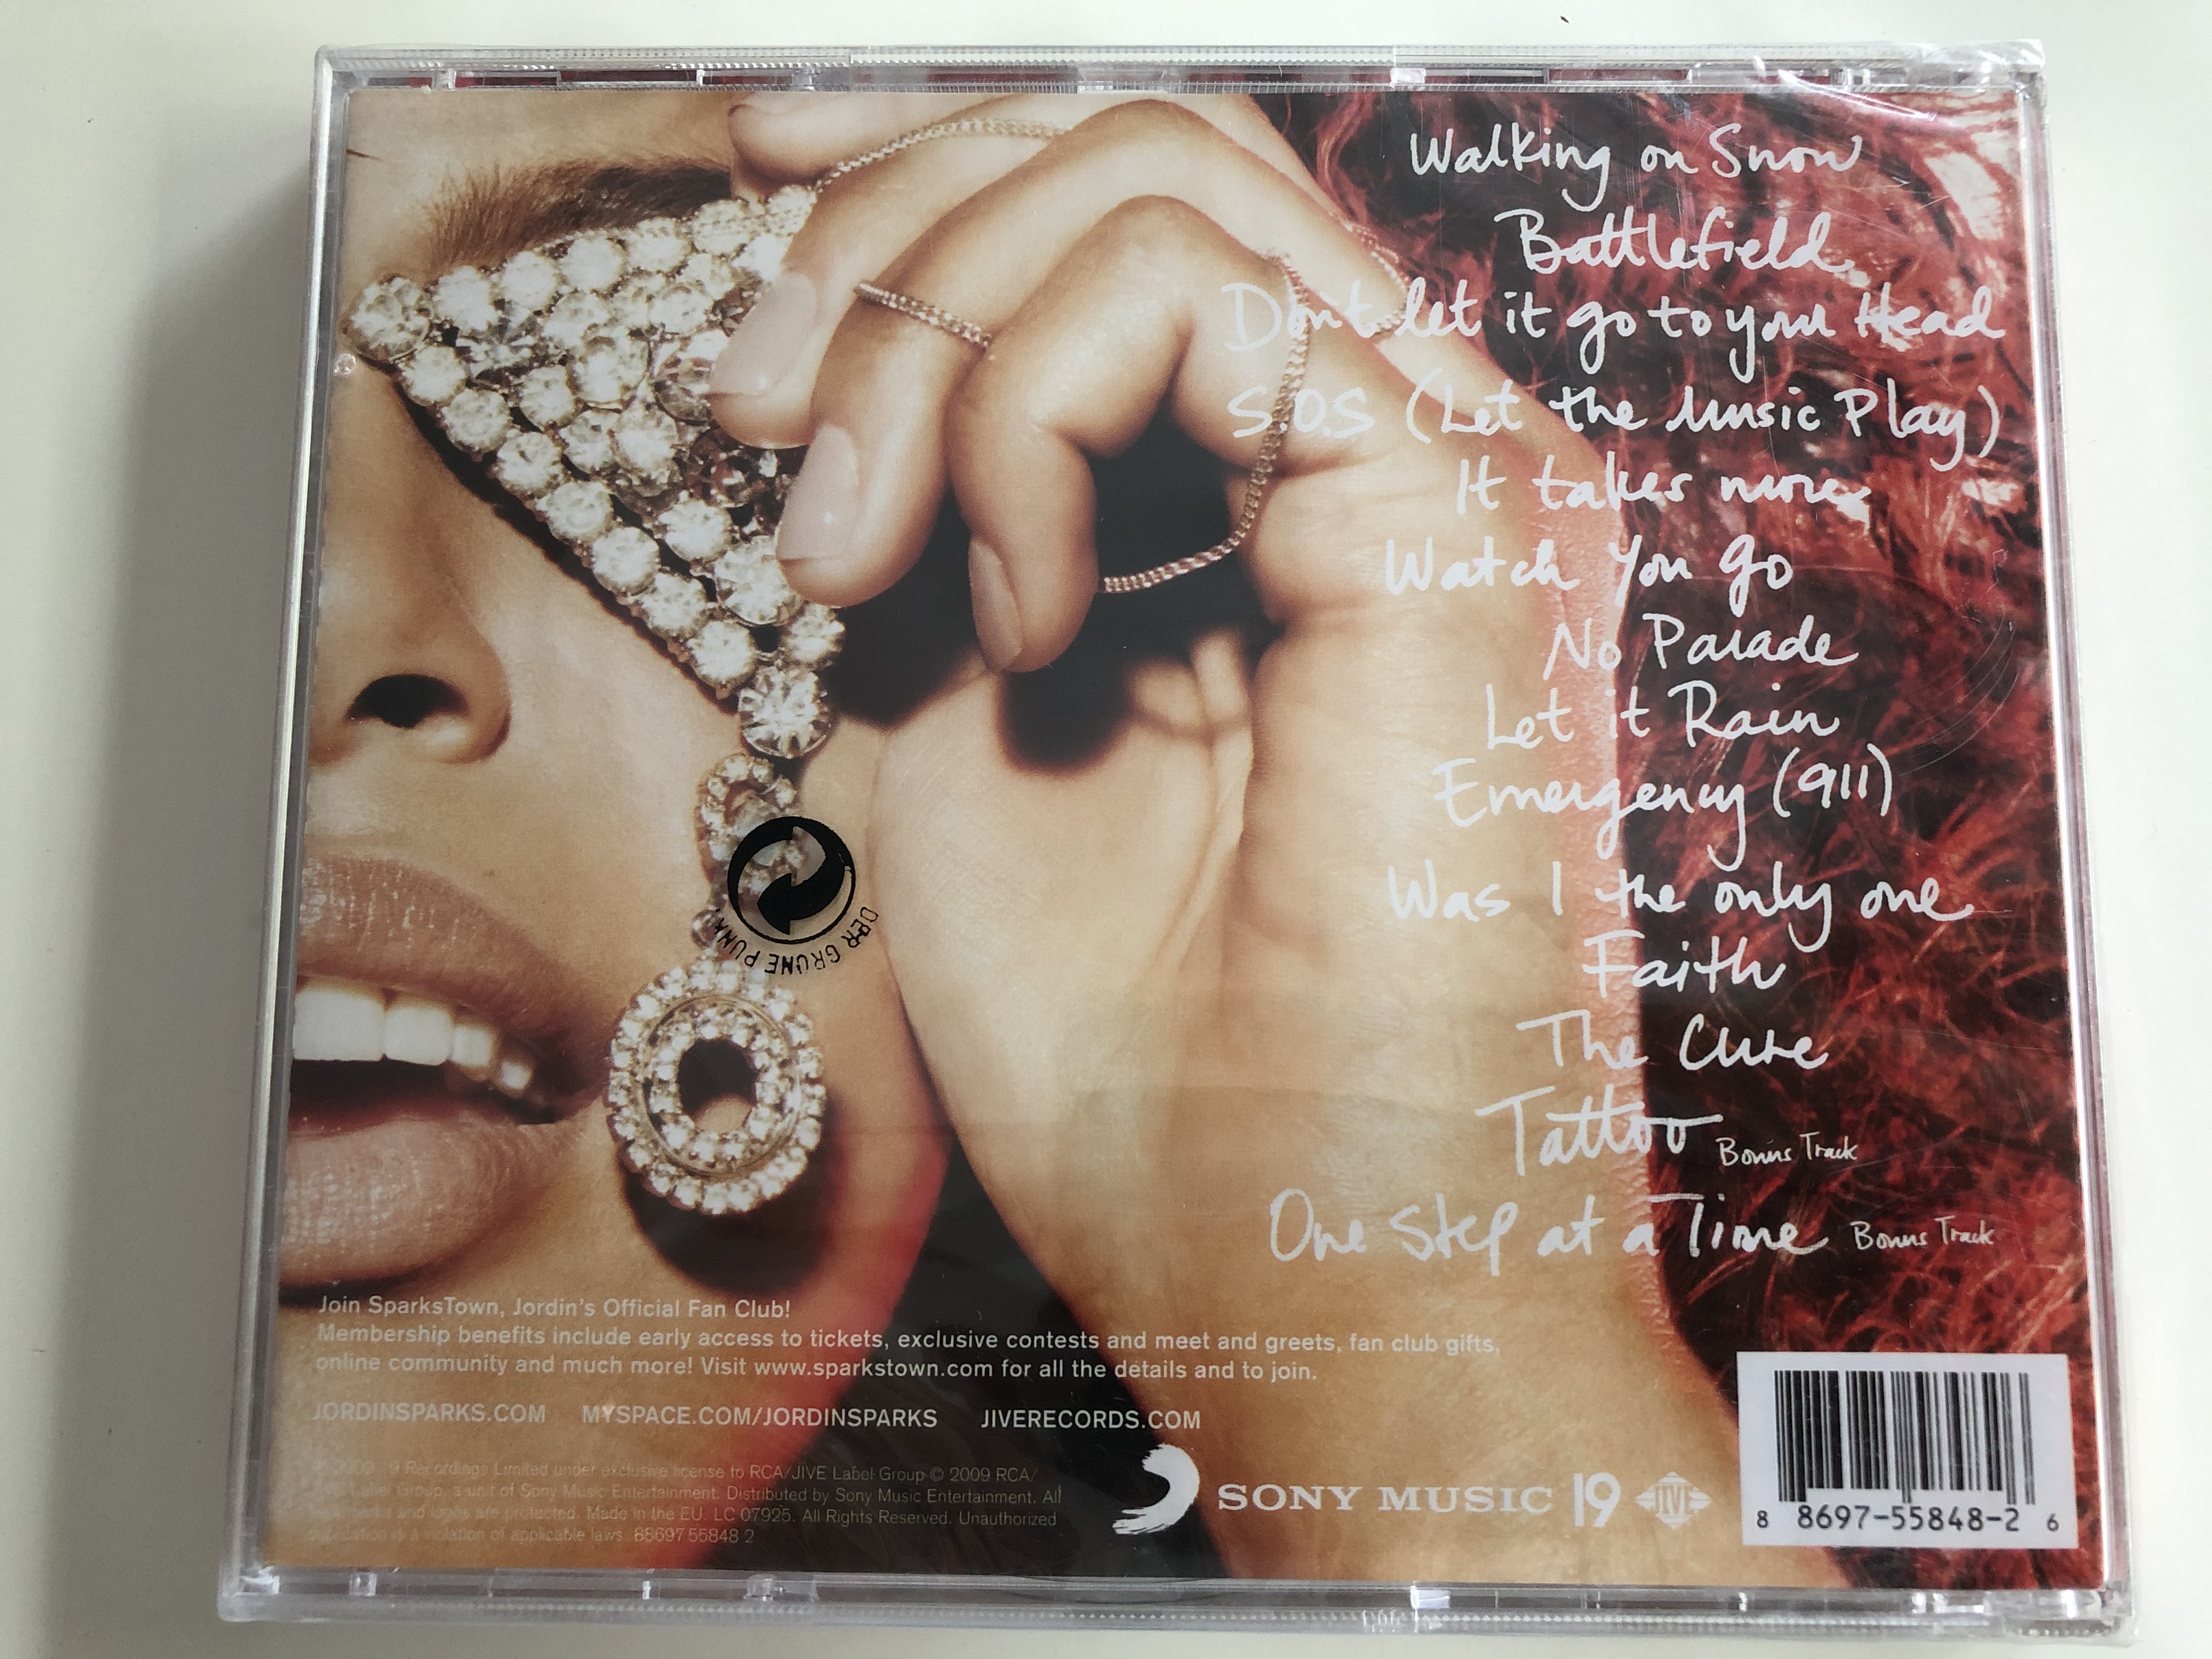 battlefield-jordin-sparks-featuring-the-smash-single-battlefield-also-includes-s.o.s.-let-the-music-play-.-also-available-limited-edition-deluxe-19-recordings-audio-cd-2009-8869.jpg